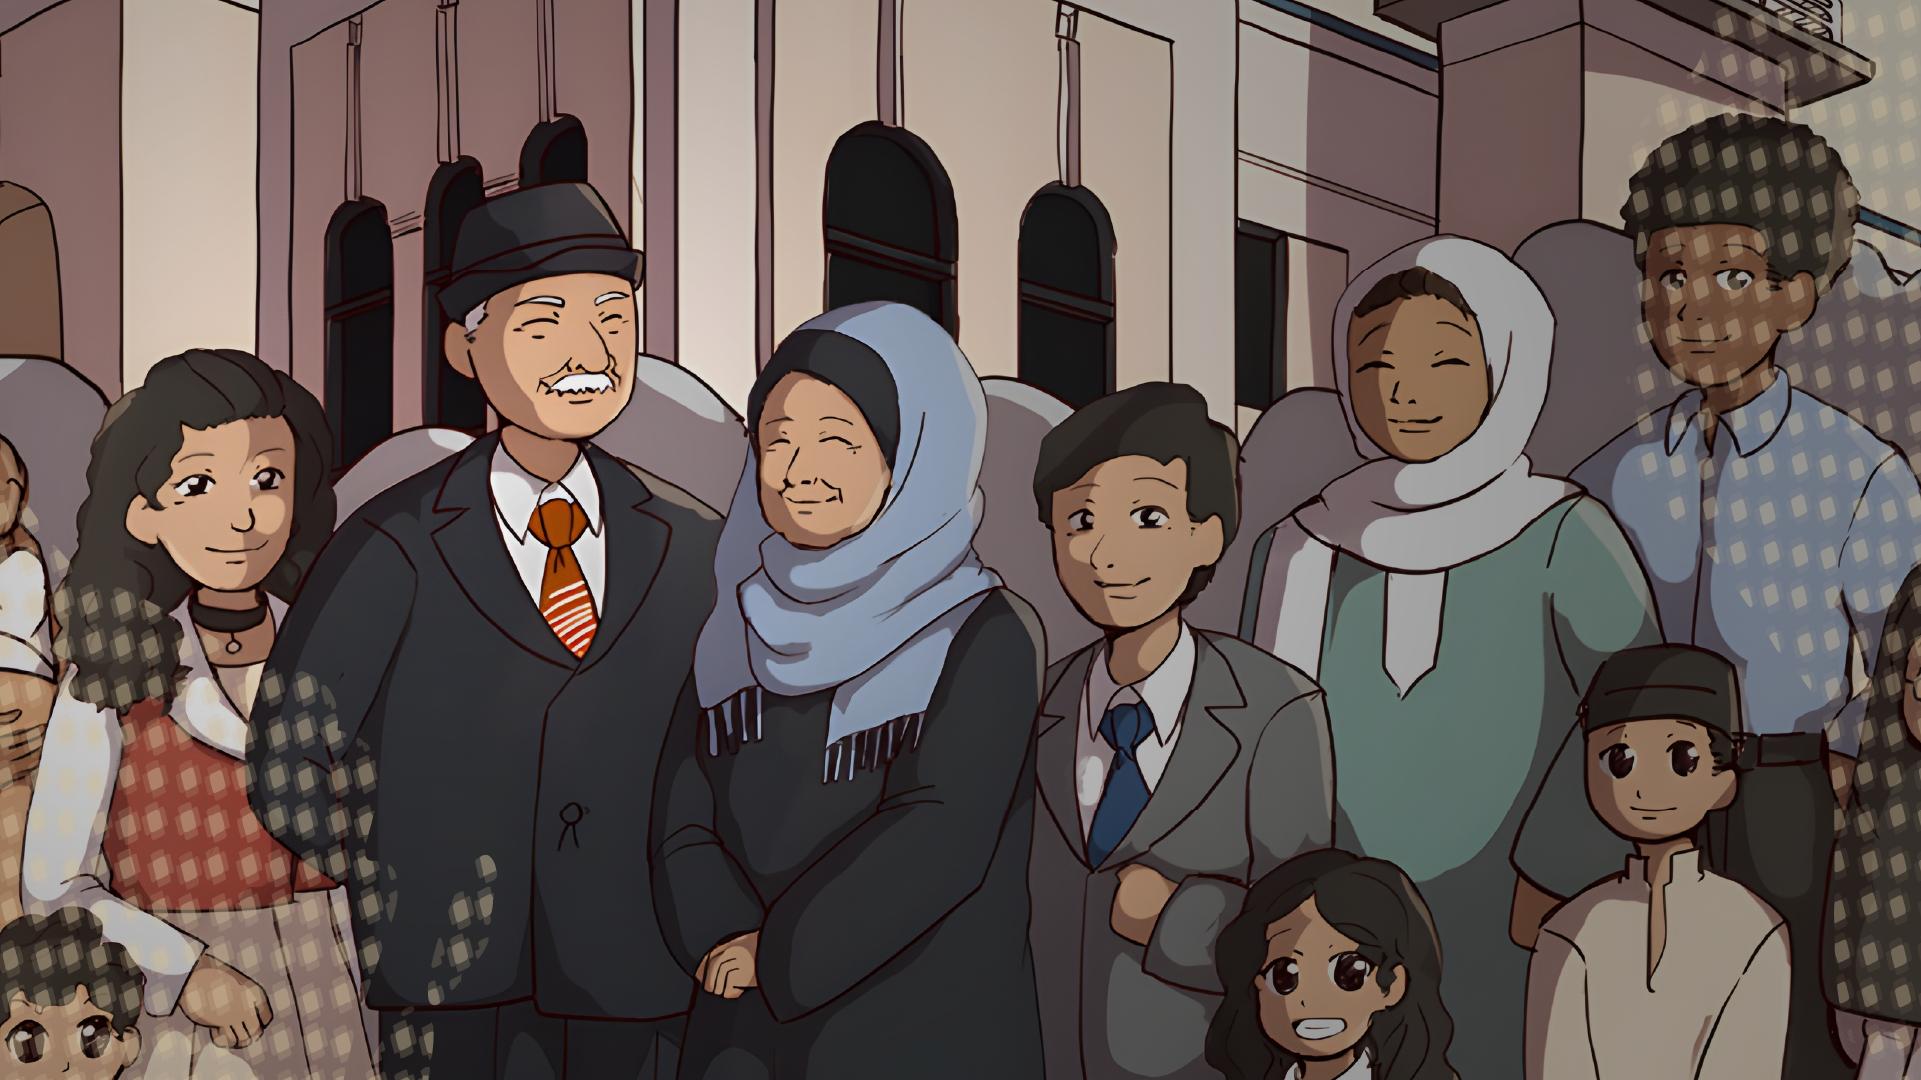 Illustration of a Muslim family.